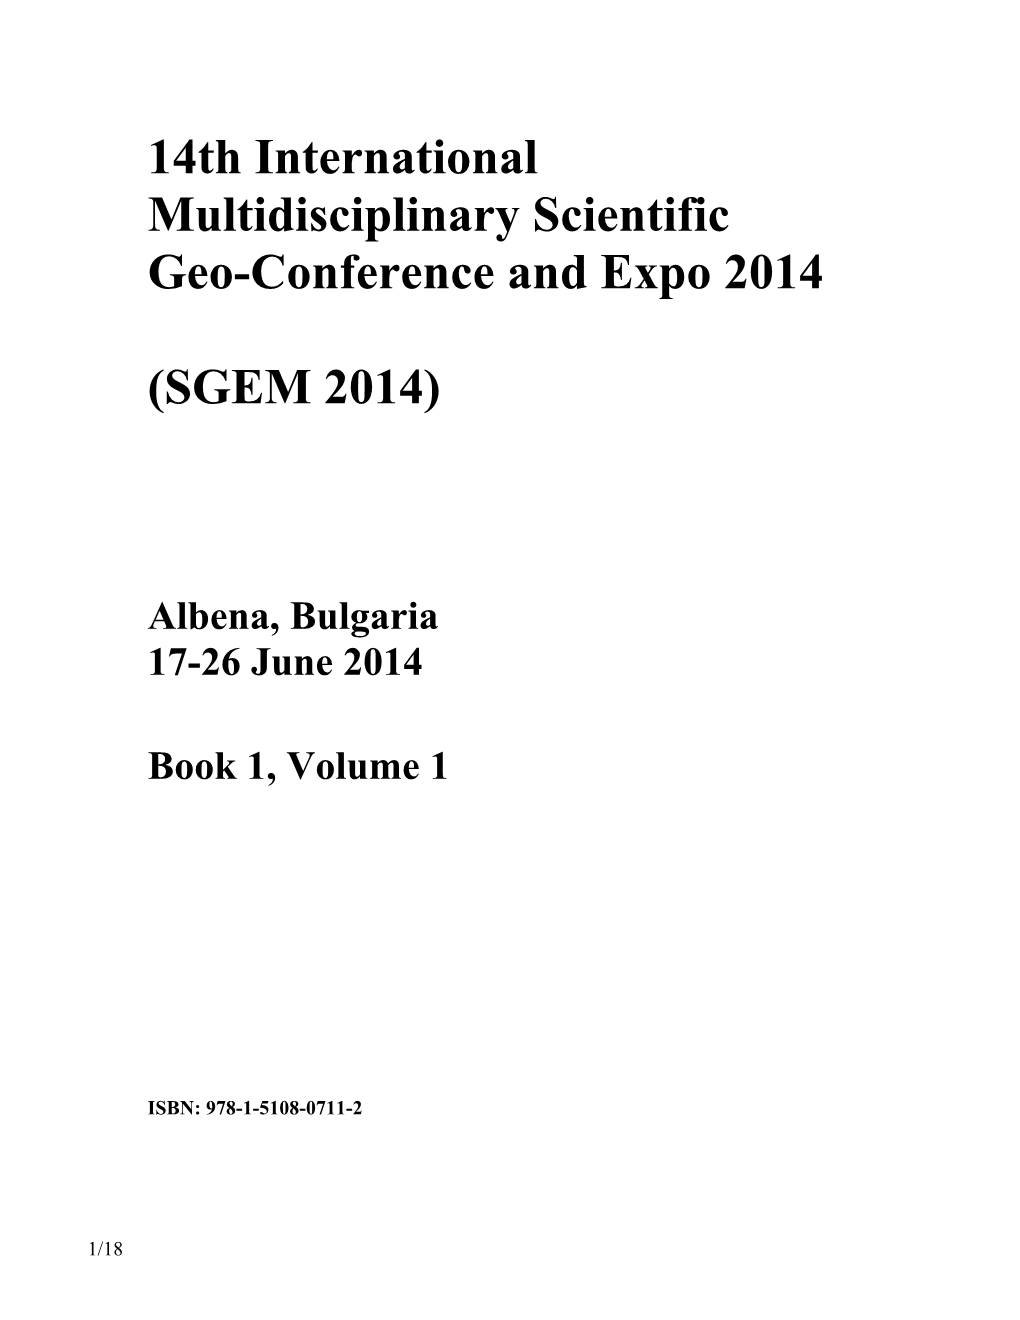 14Th International Multidisciplinary Scientific Geo-Conference and Expo 2014